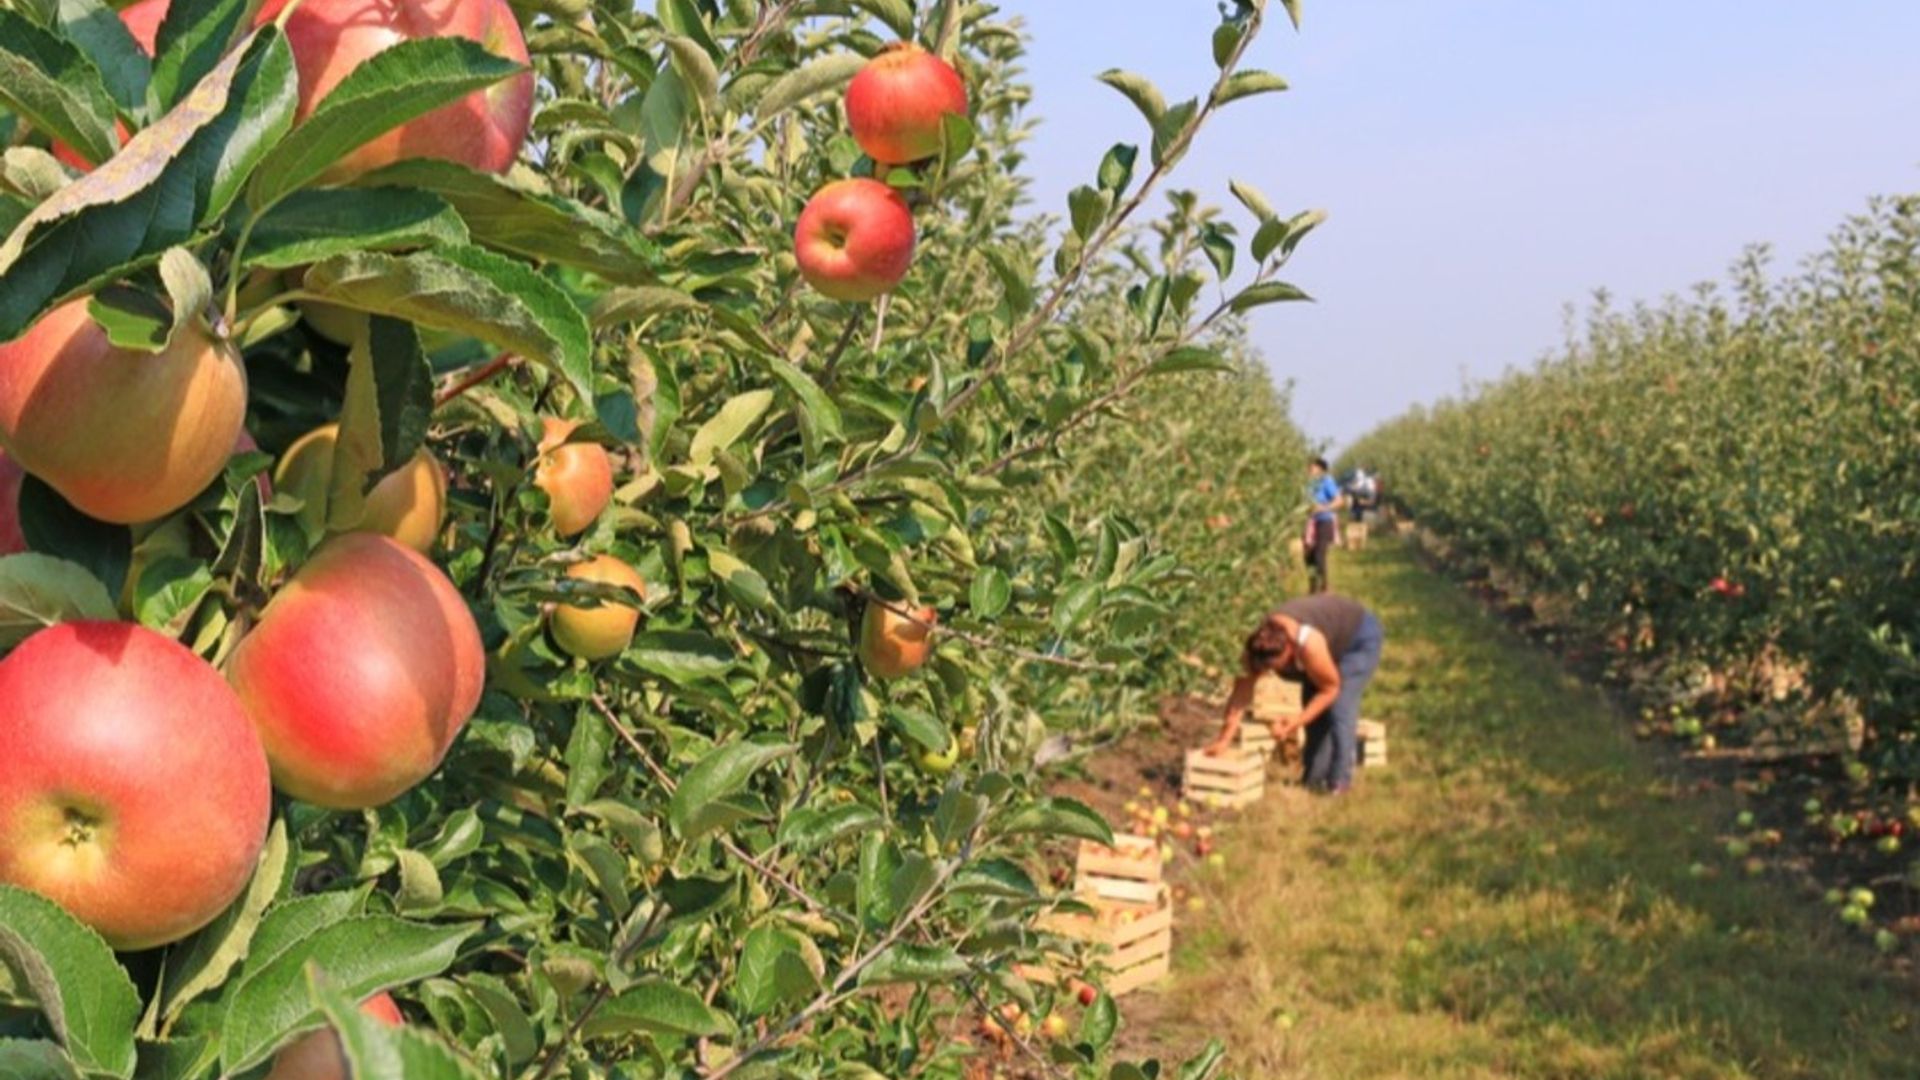 Image of farm workers harvesting apples in an orchard